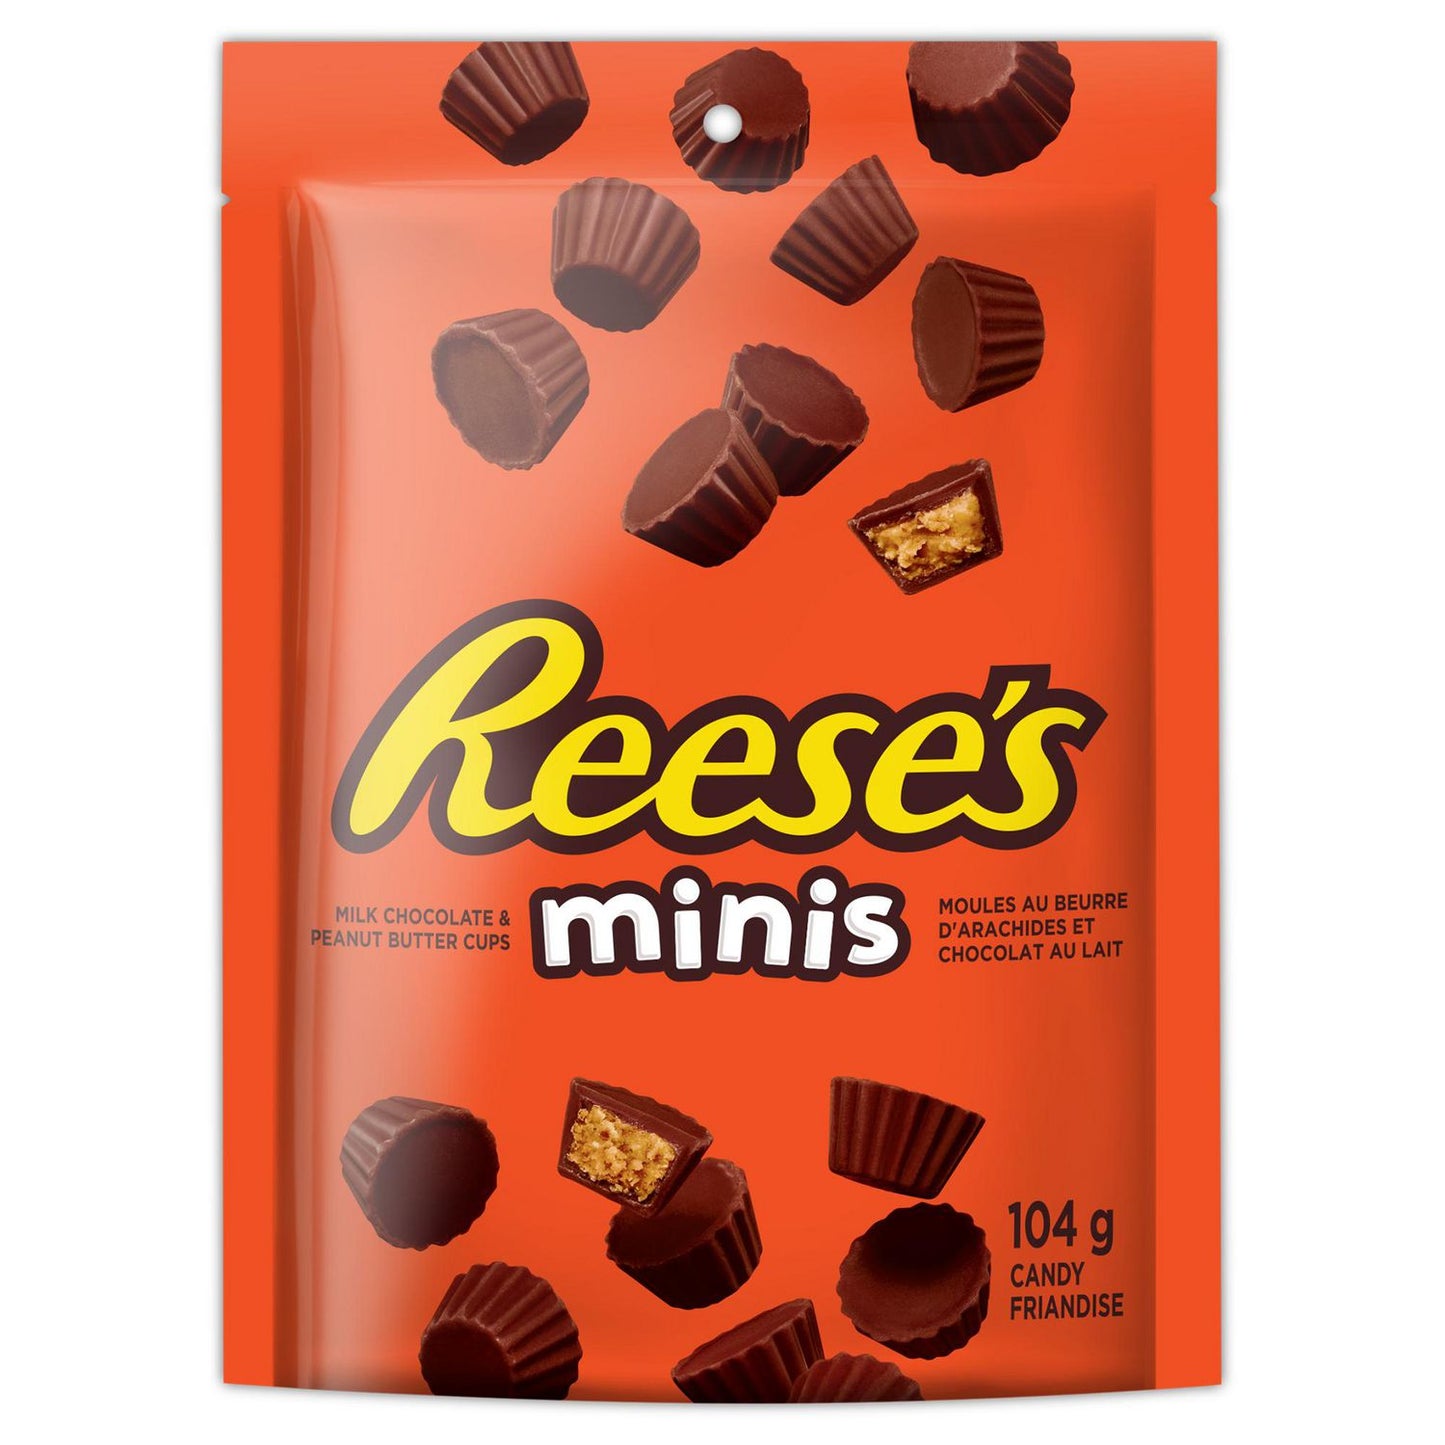 REESE'S Minis PEANUT BUTTER CUPS Candy